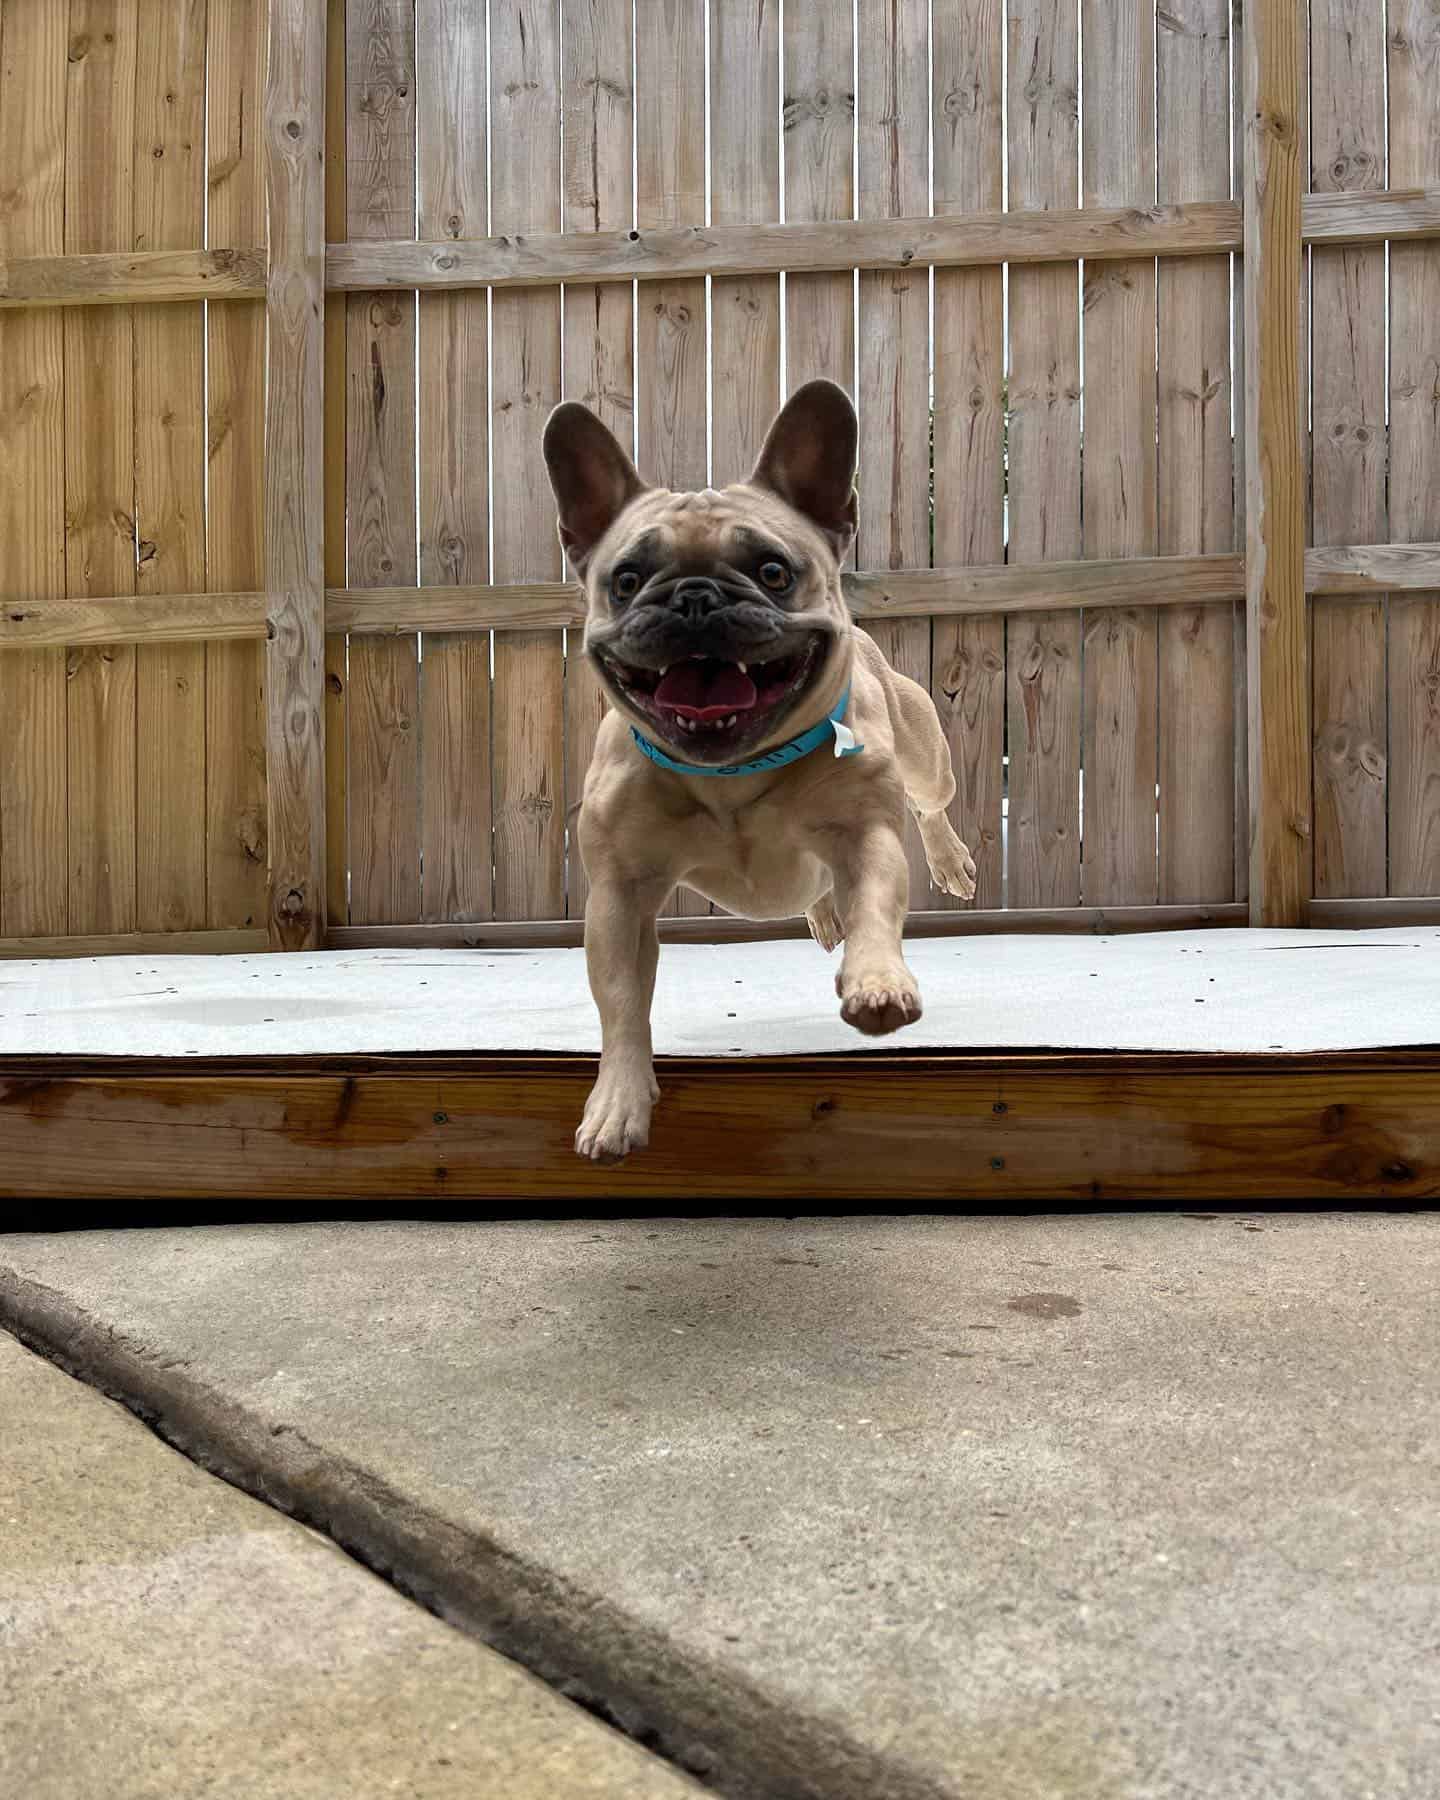 A happy clean dog jumping